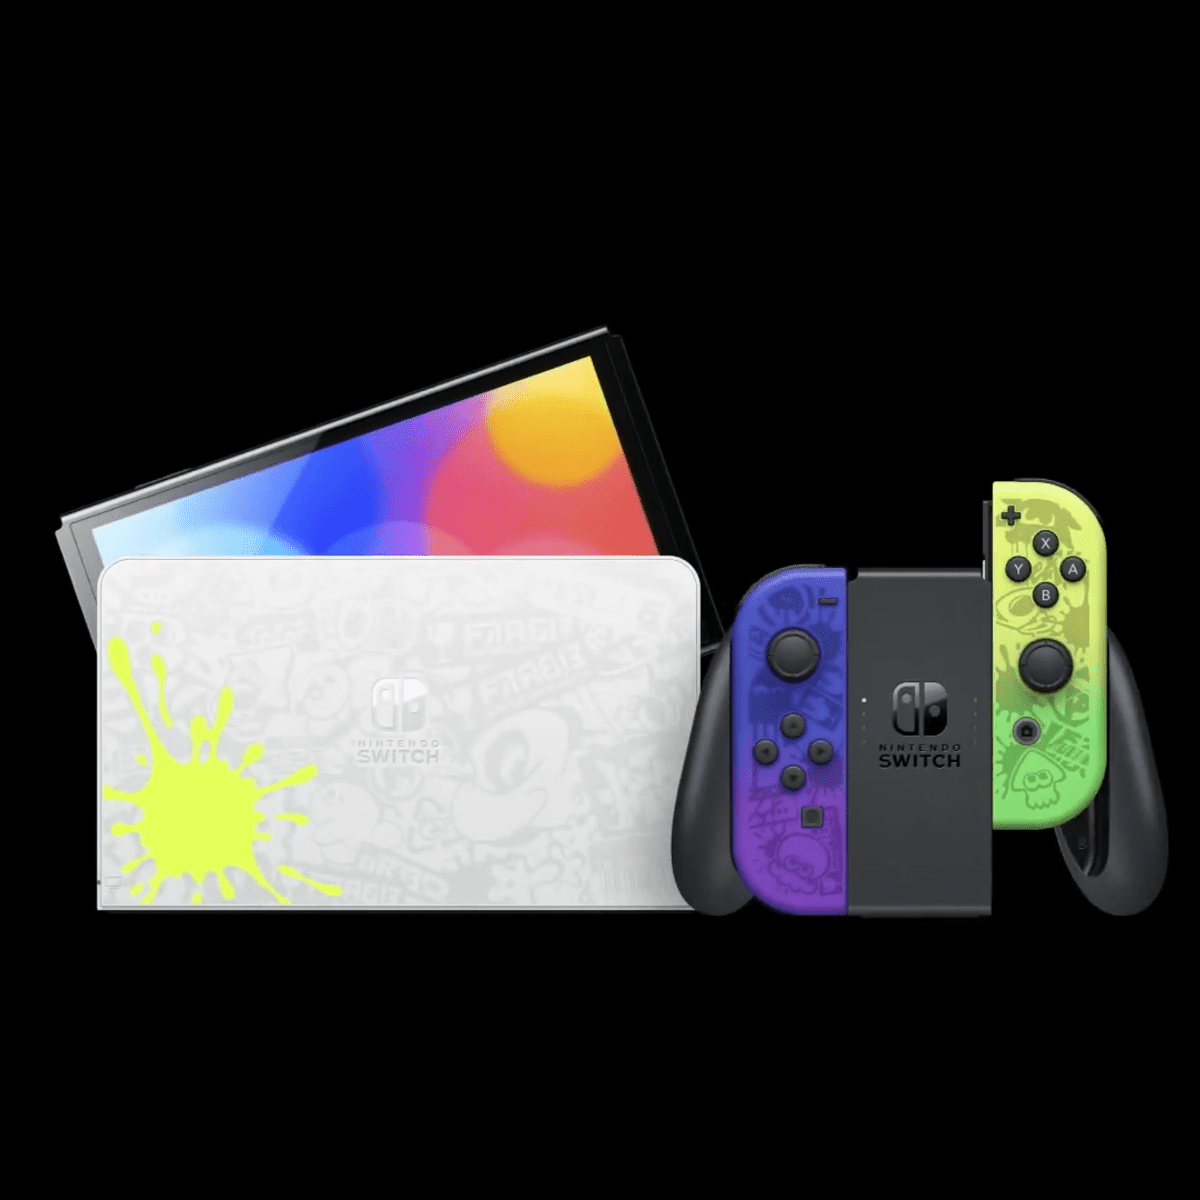 The Splatoon 3 Special Edition Nintendo Switch